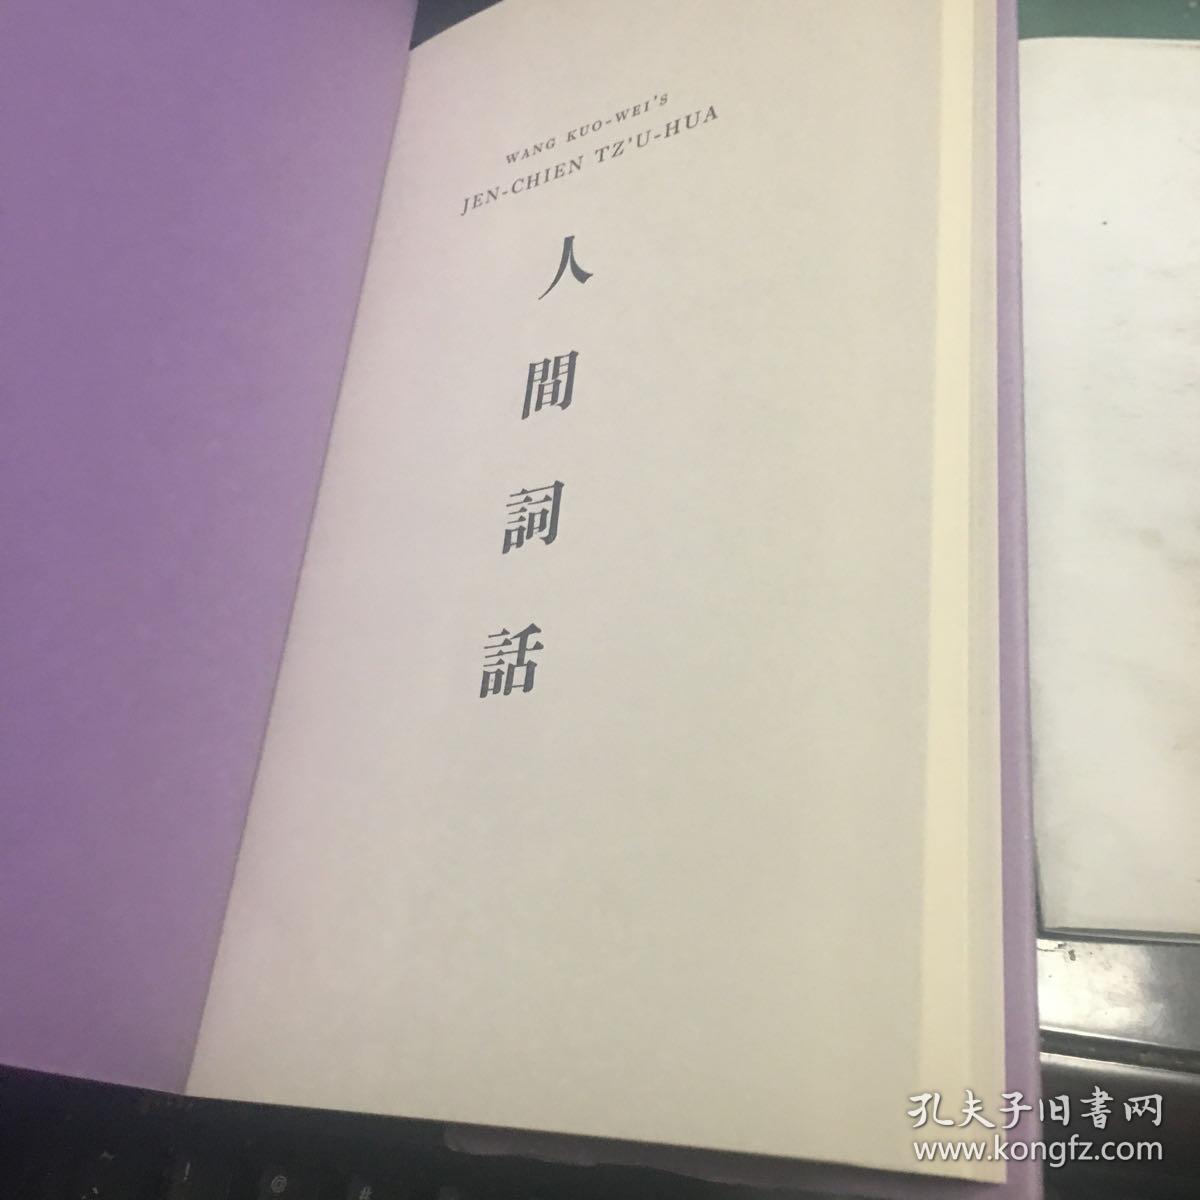 Wang Kuo-wei's Jen-chien Tz'u-hua translated with an introduction by王国维 人间词话 英文译本